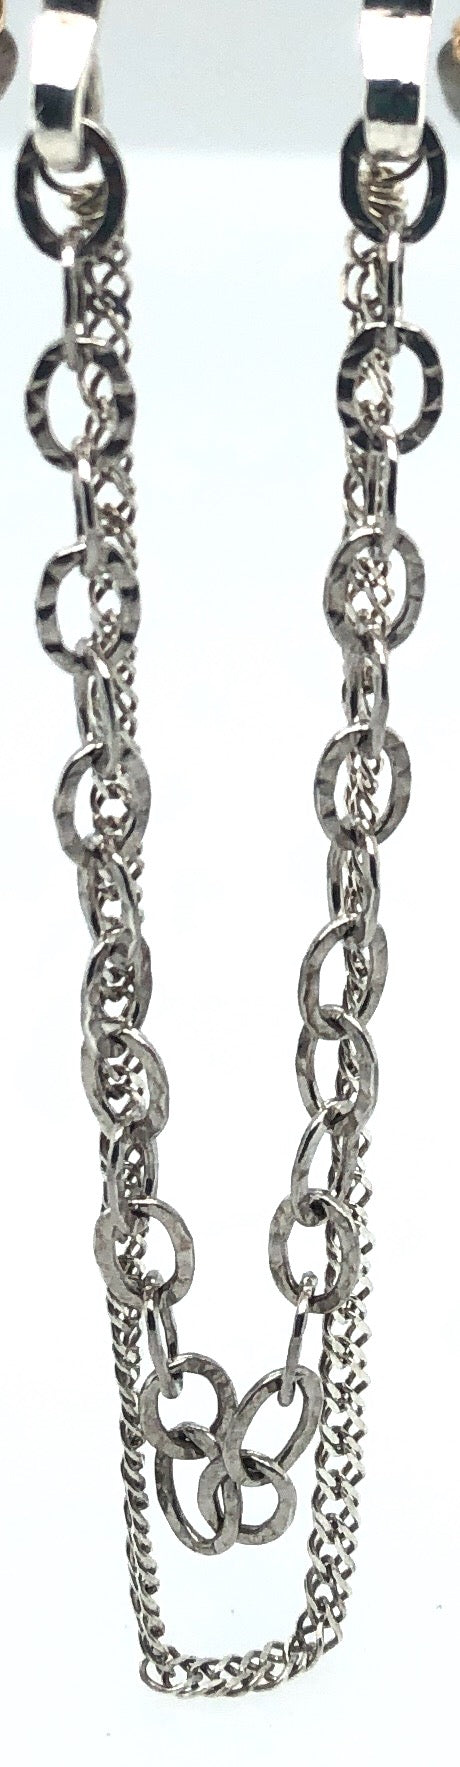 Two textured substantial sterling silver chains give this necklace luxurious drape.